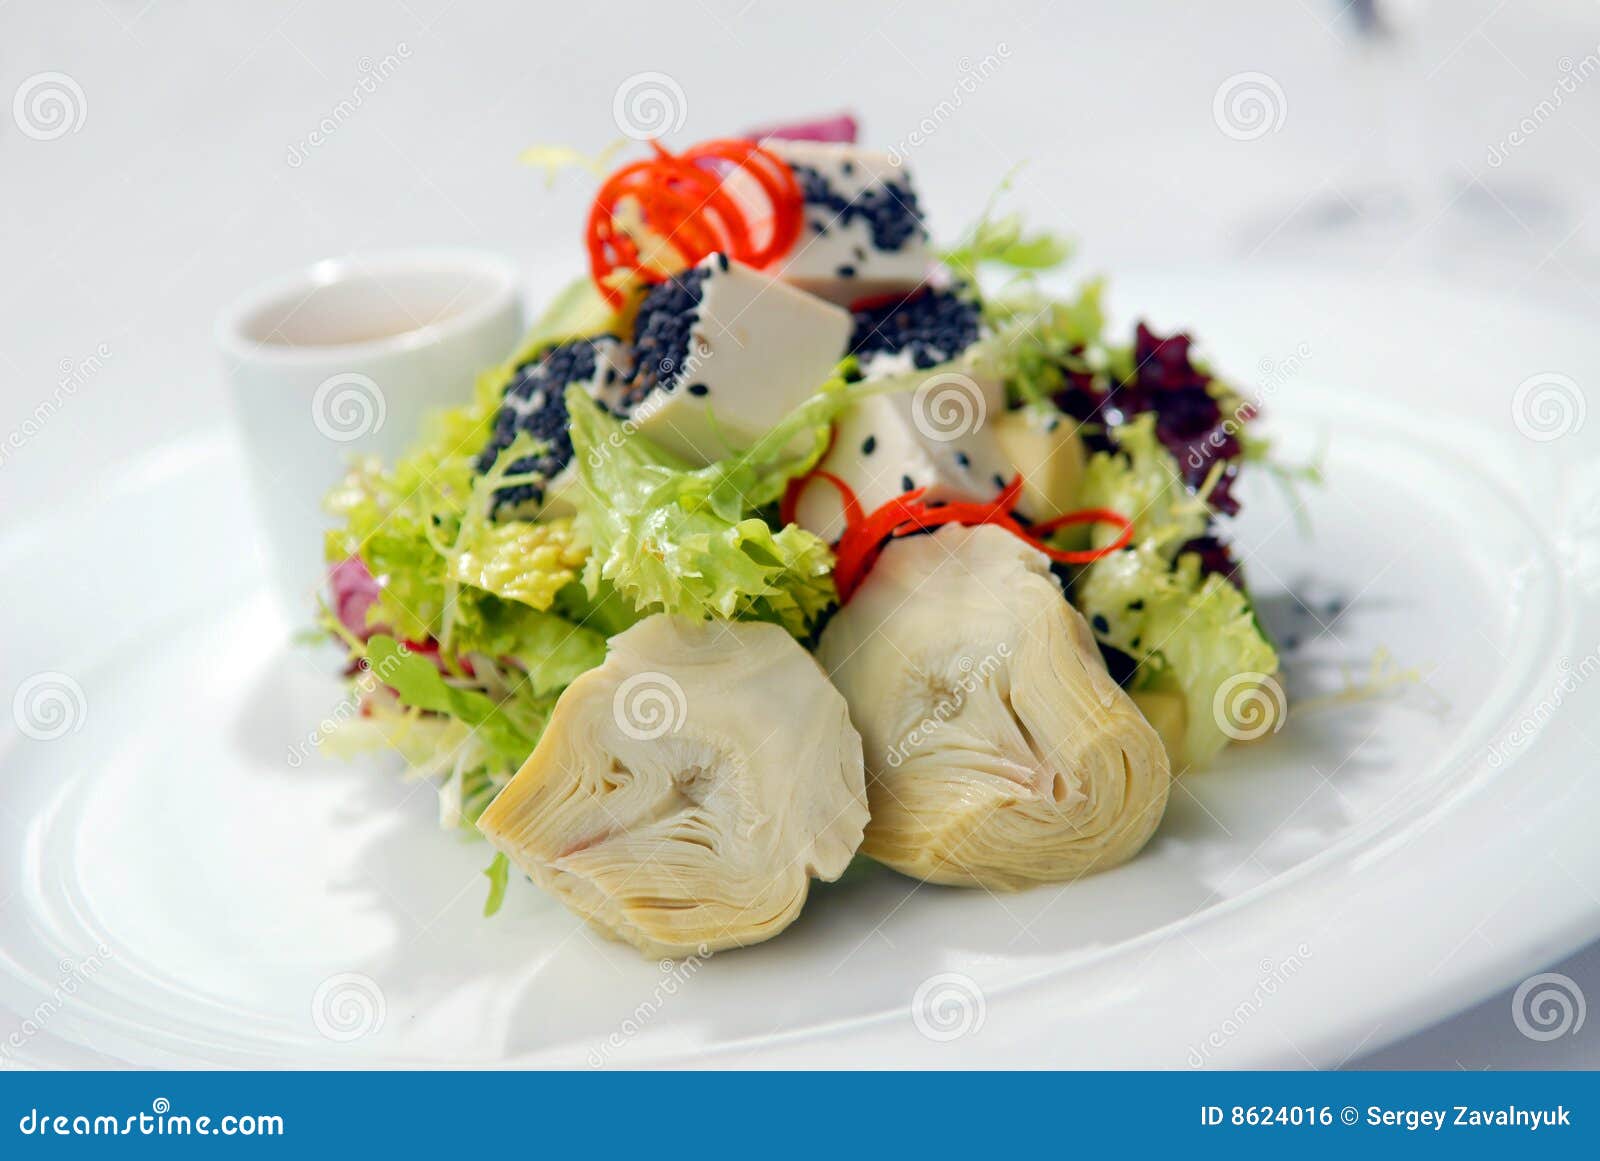 salad with a crude and artichokes